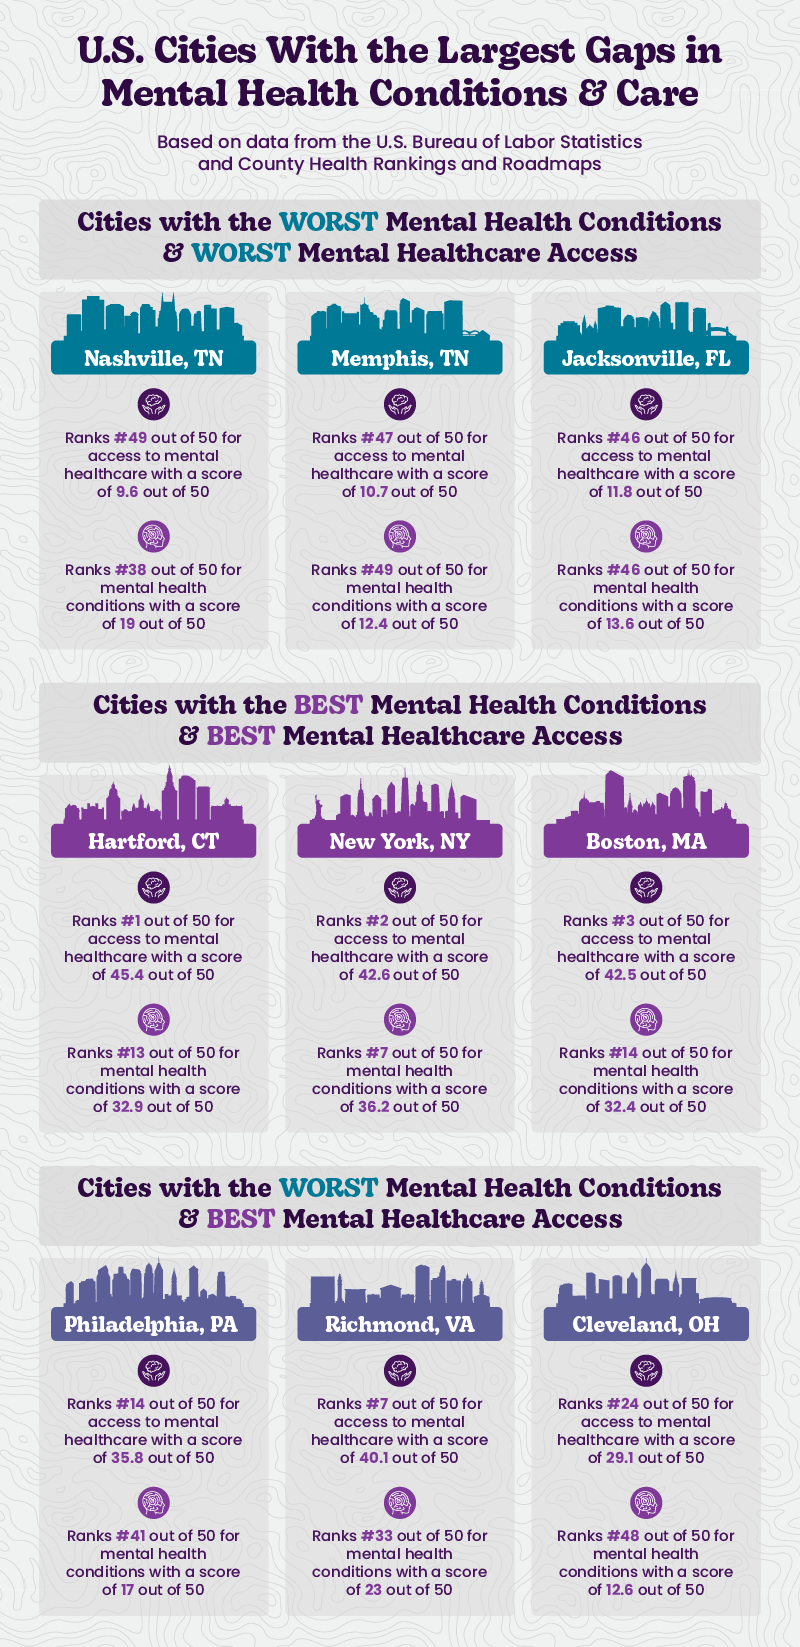 Infographic displaying the U.S. cities with the largest gaps in mental health conditions and care